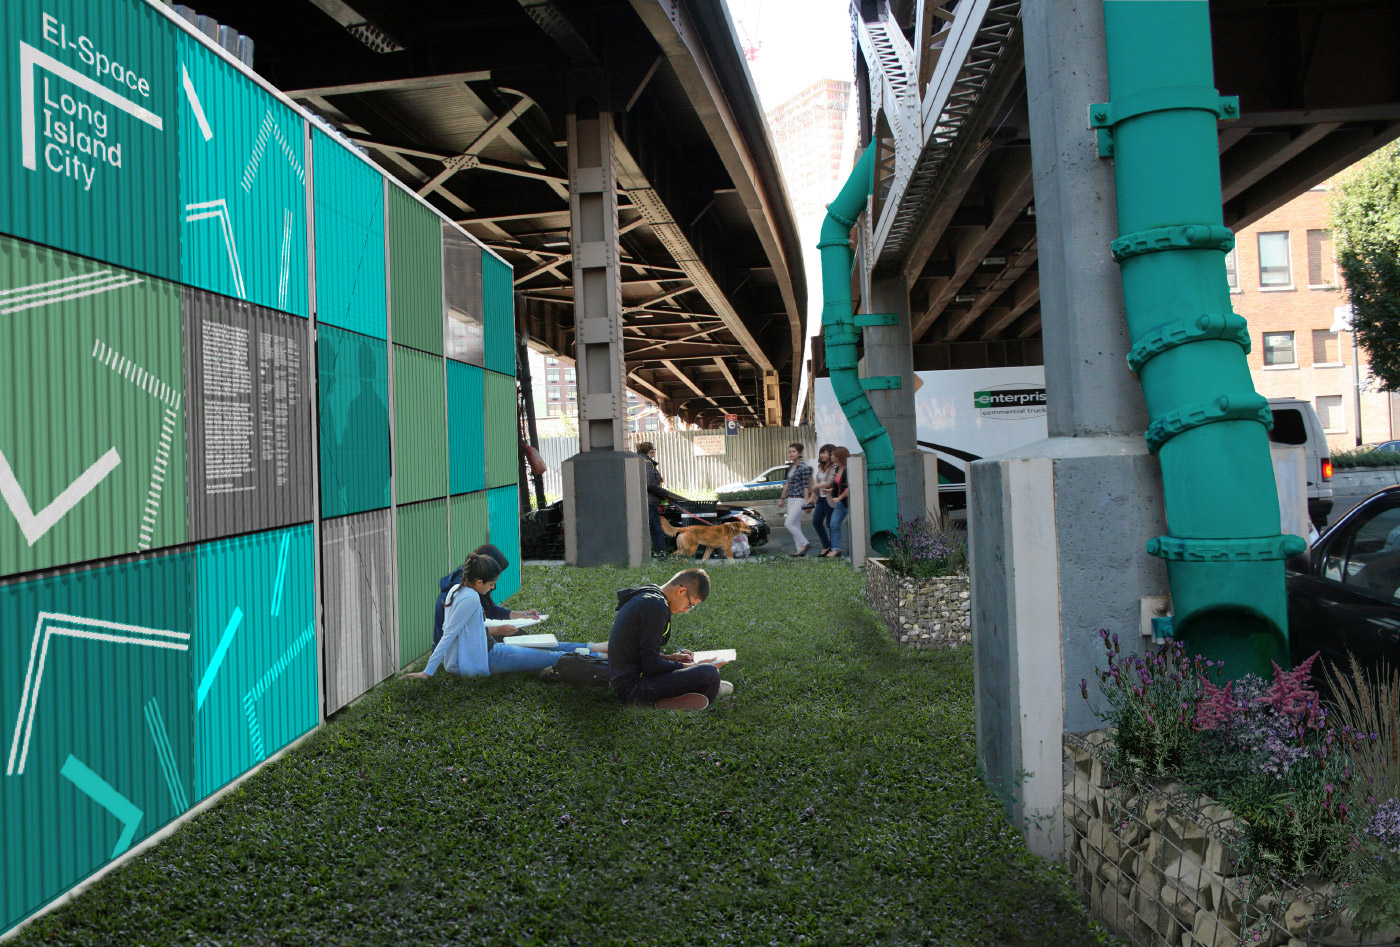 Rendering of a grass patch under elevated roadways